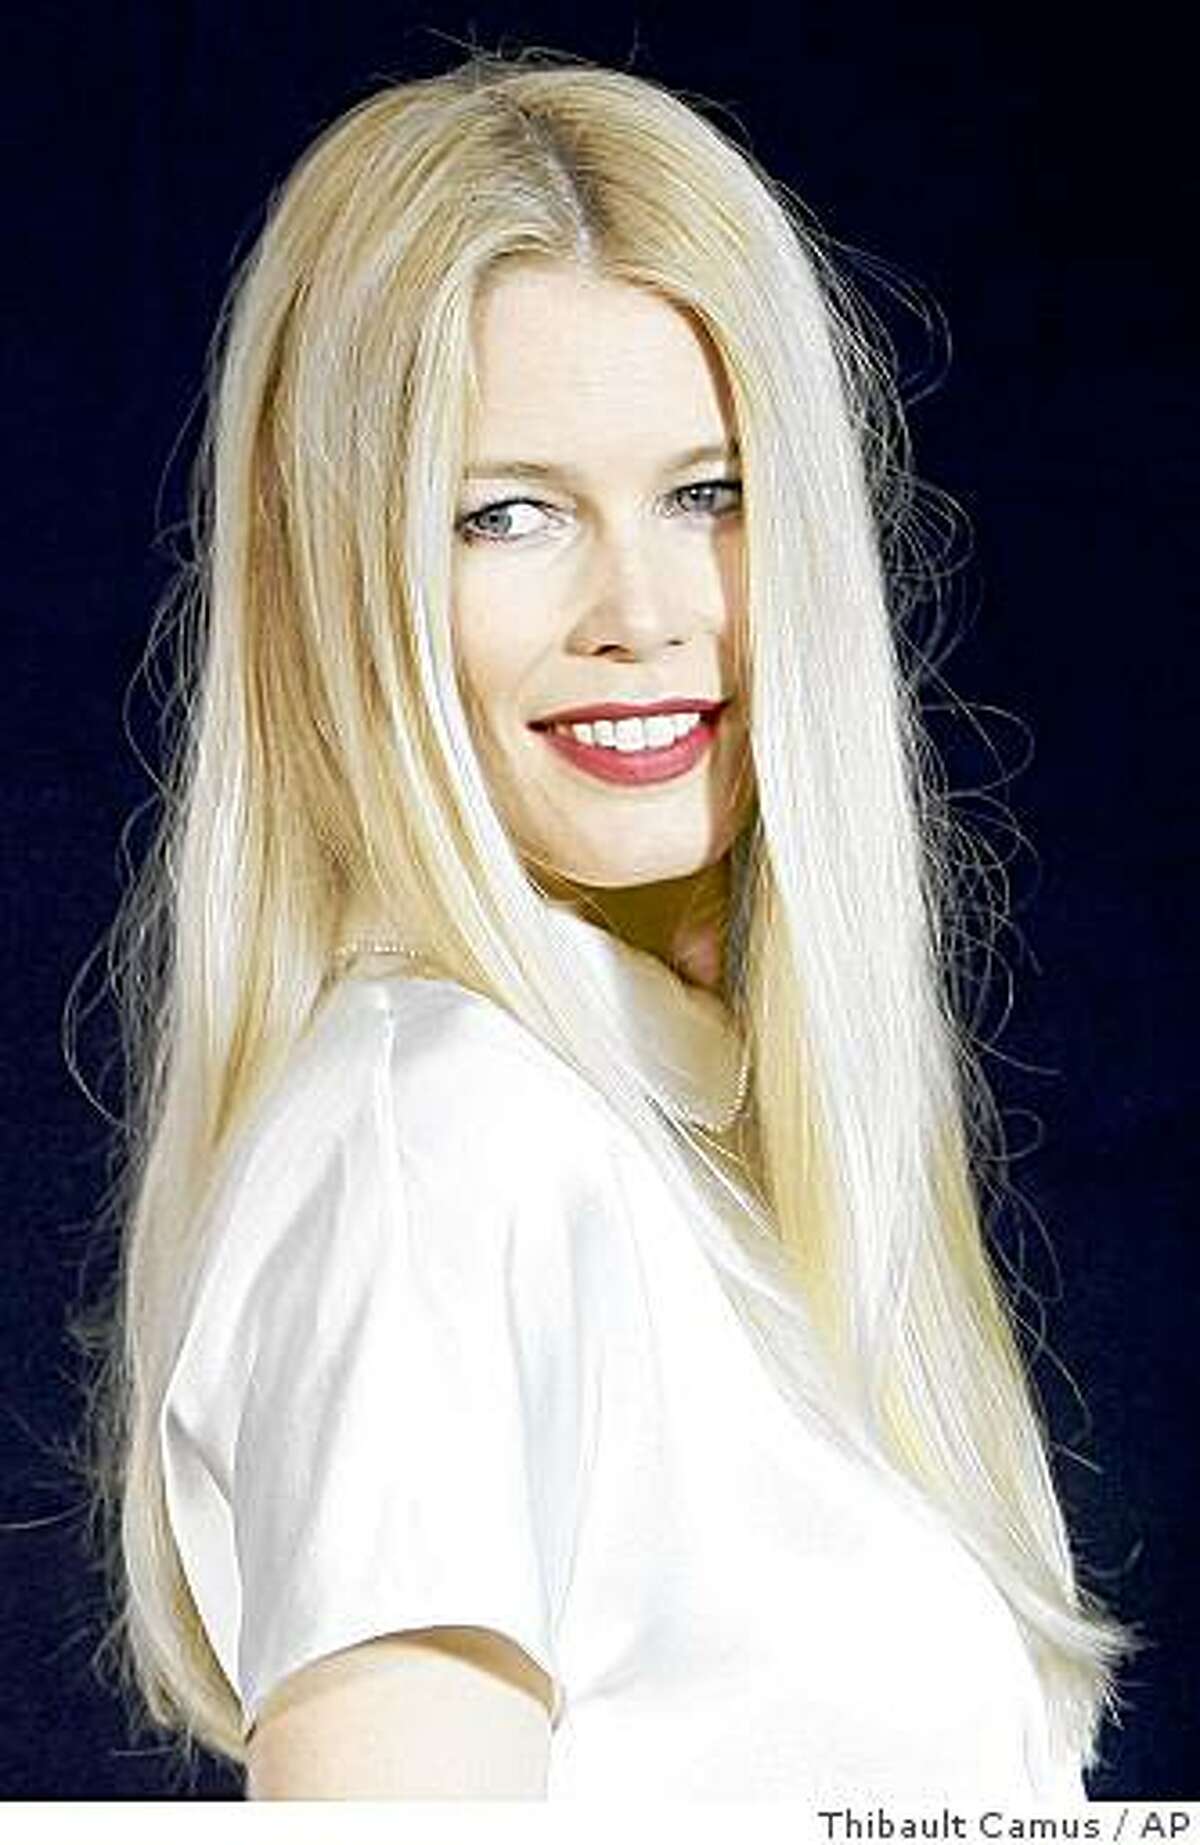 German model Claudia Schiffer is seen prior to the presentation of Chanel's Fall-Winter 2009-2010 ready-to-wear collection, Tuesday, March 10, 2009 in Paris.